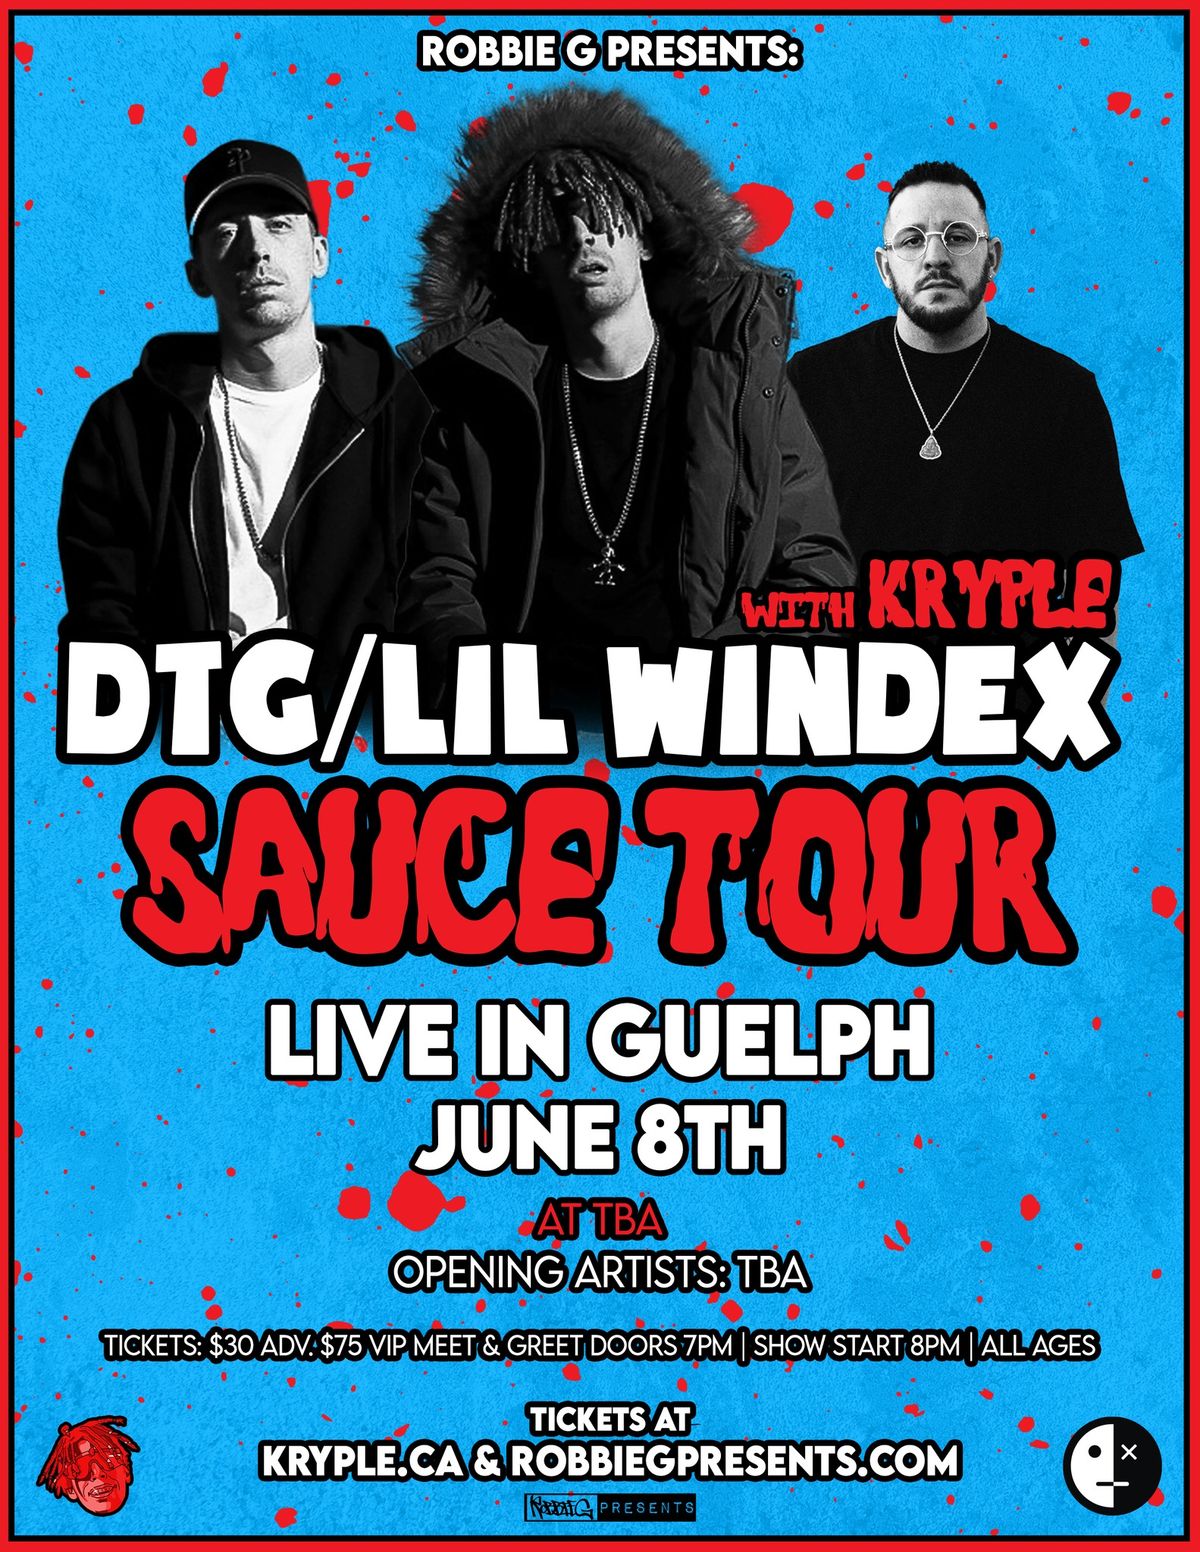 DTG\/Lil Windex Live in Guelph June 8th at Red Papaya with Kryple